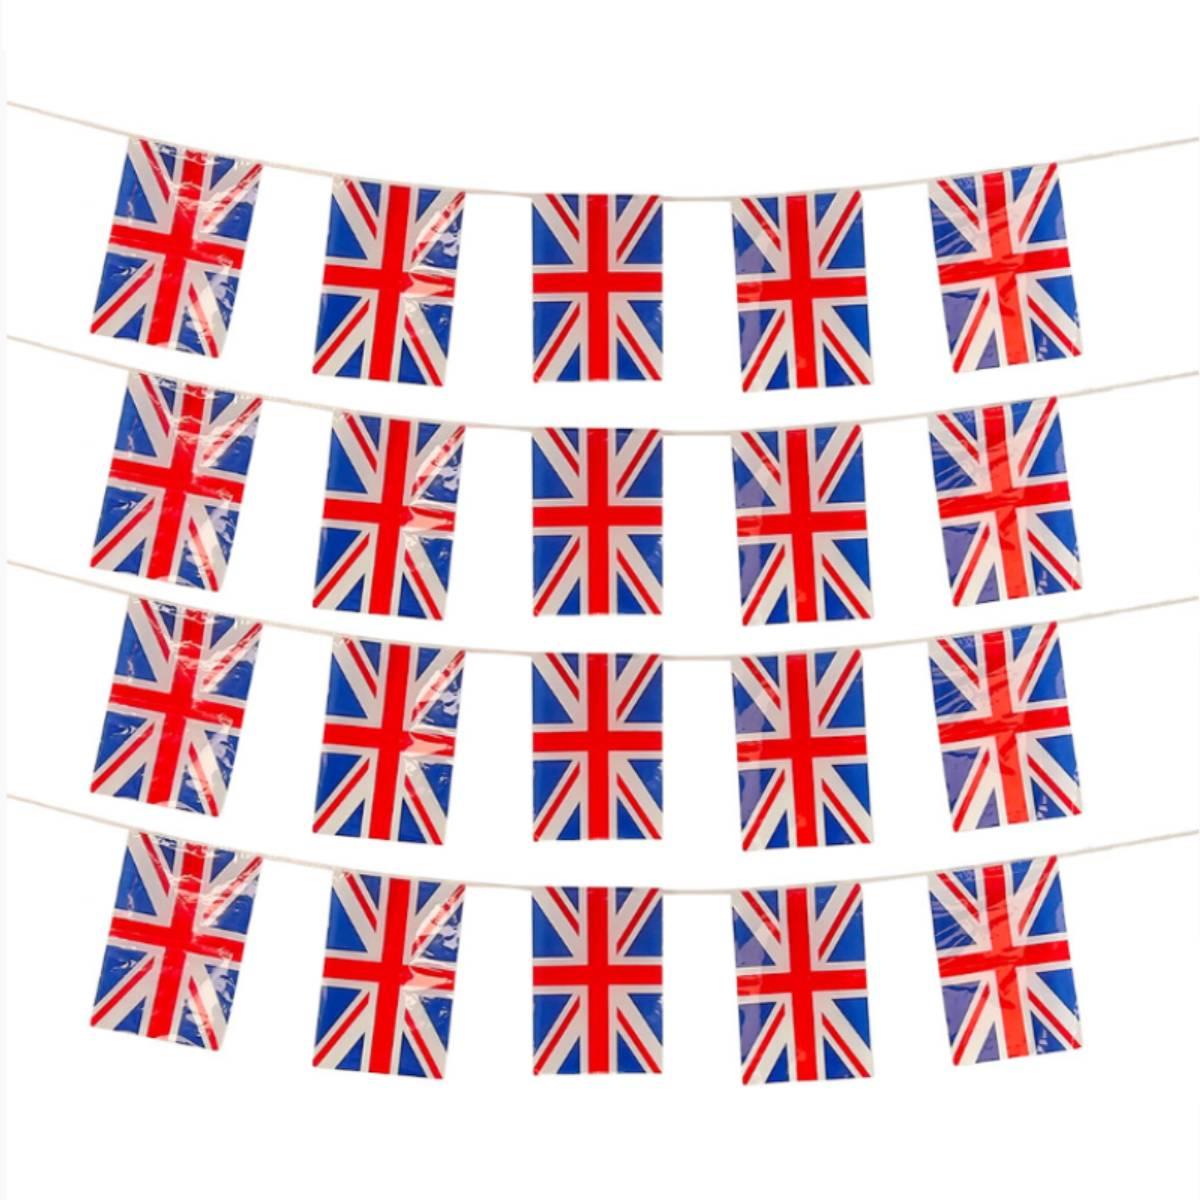 10m British Union Jack Flag Bunting with 20 Pennants by Wicked AC-9438 available here at Karnival Costumes online party shop